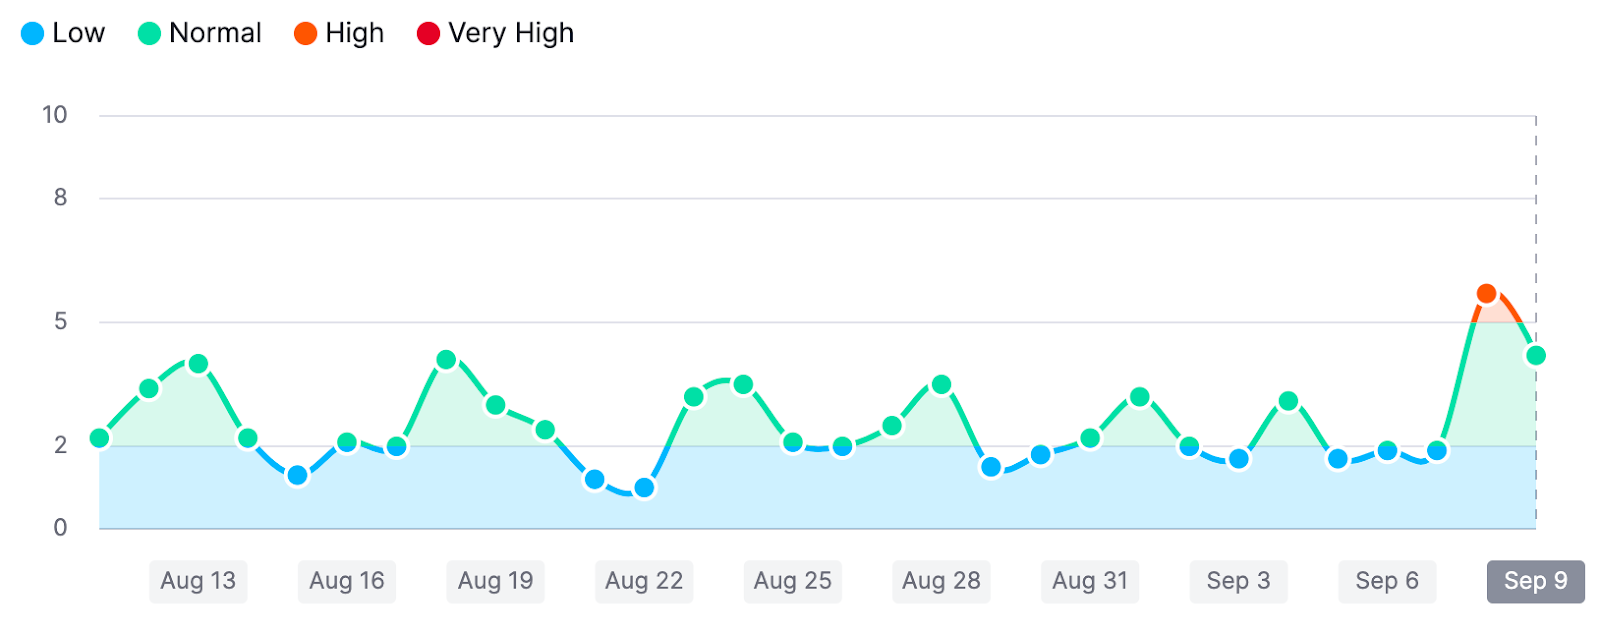 high volatility in the SERPs on September 9